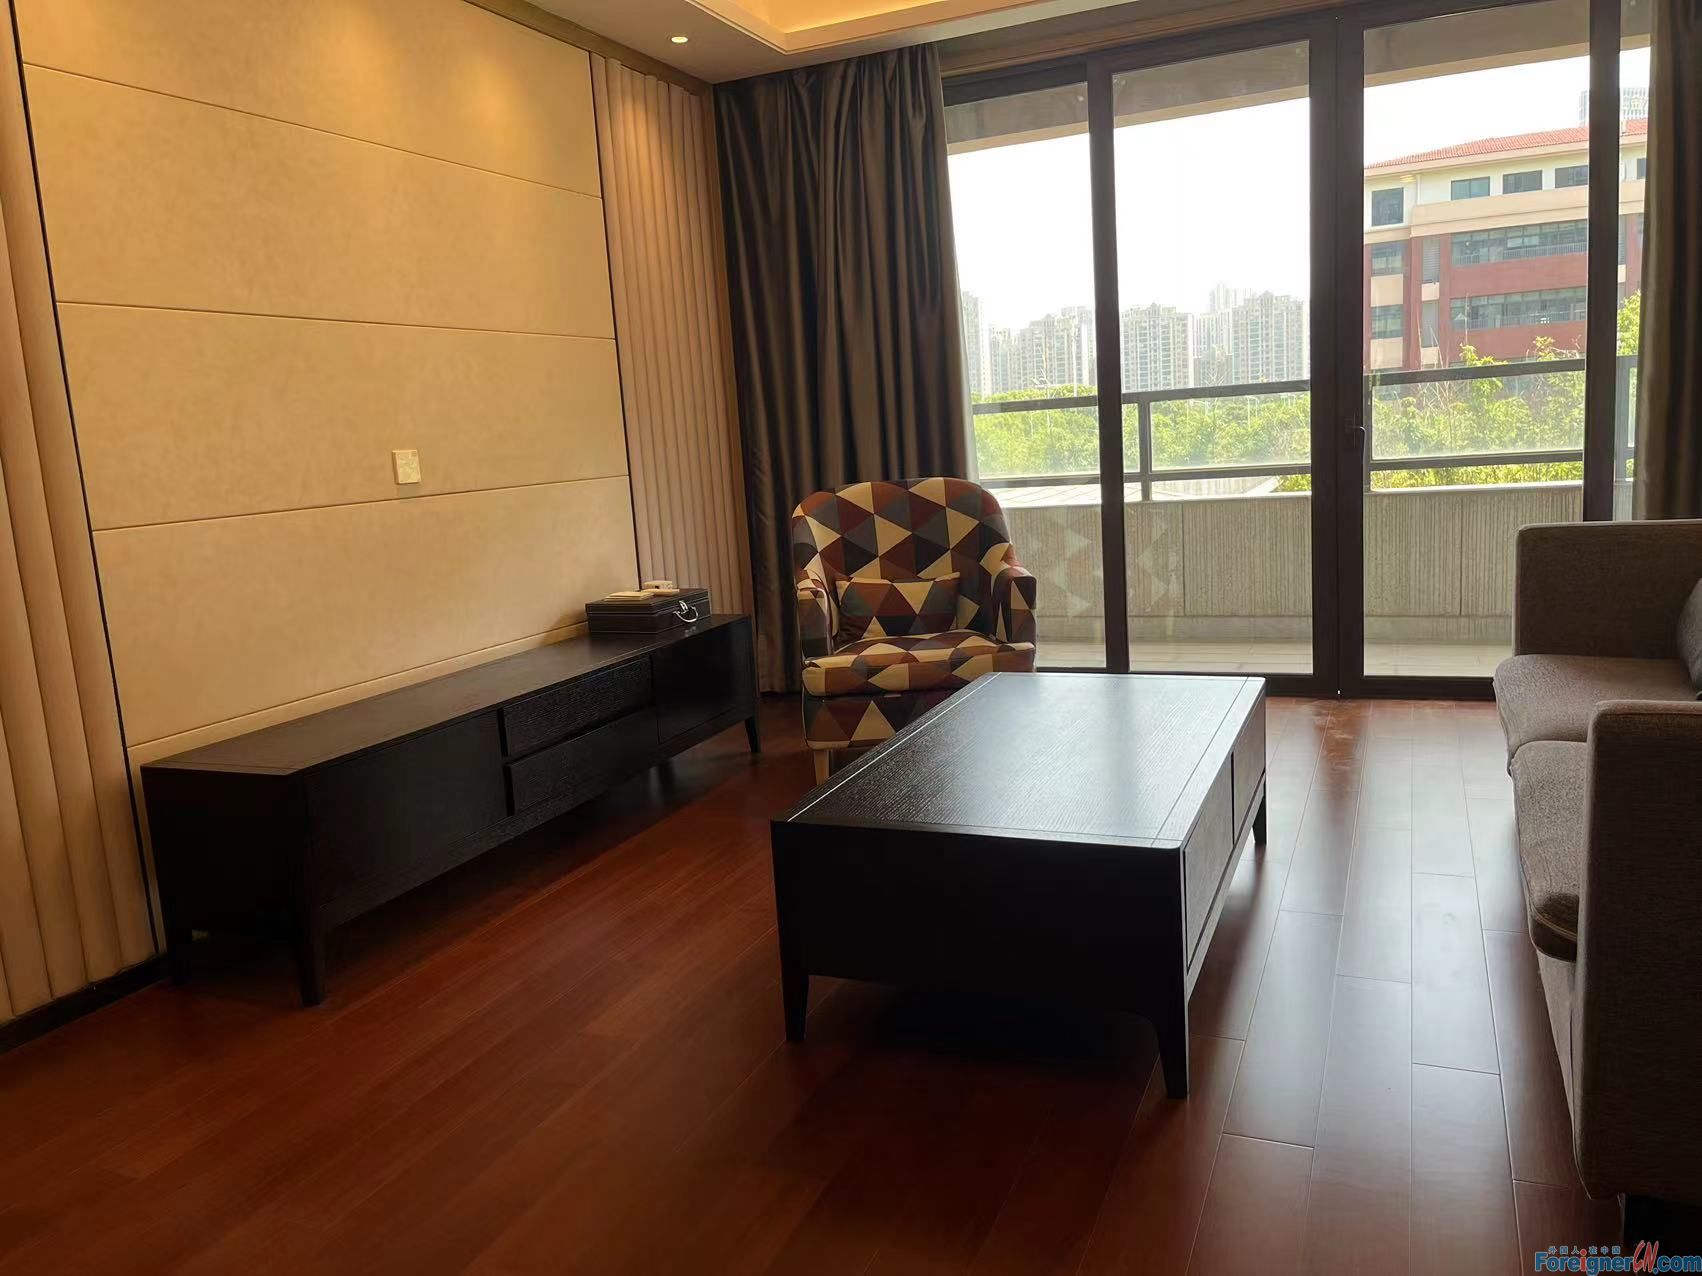 Modern!!! Park Mansion apartment for Expats in SIP,Suzhou / bright terrace/Central AC ,Floor heating/Aeon Shopping Center/Subway station,Baitang Garden